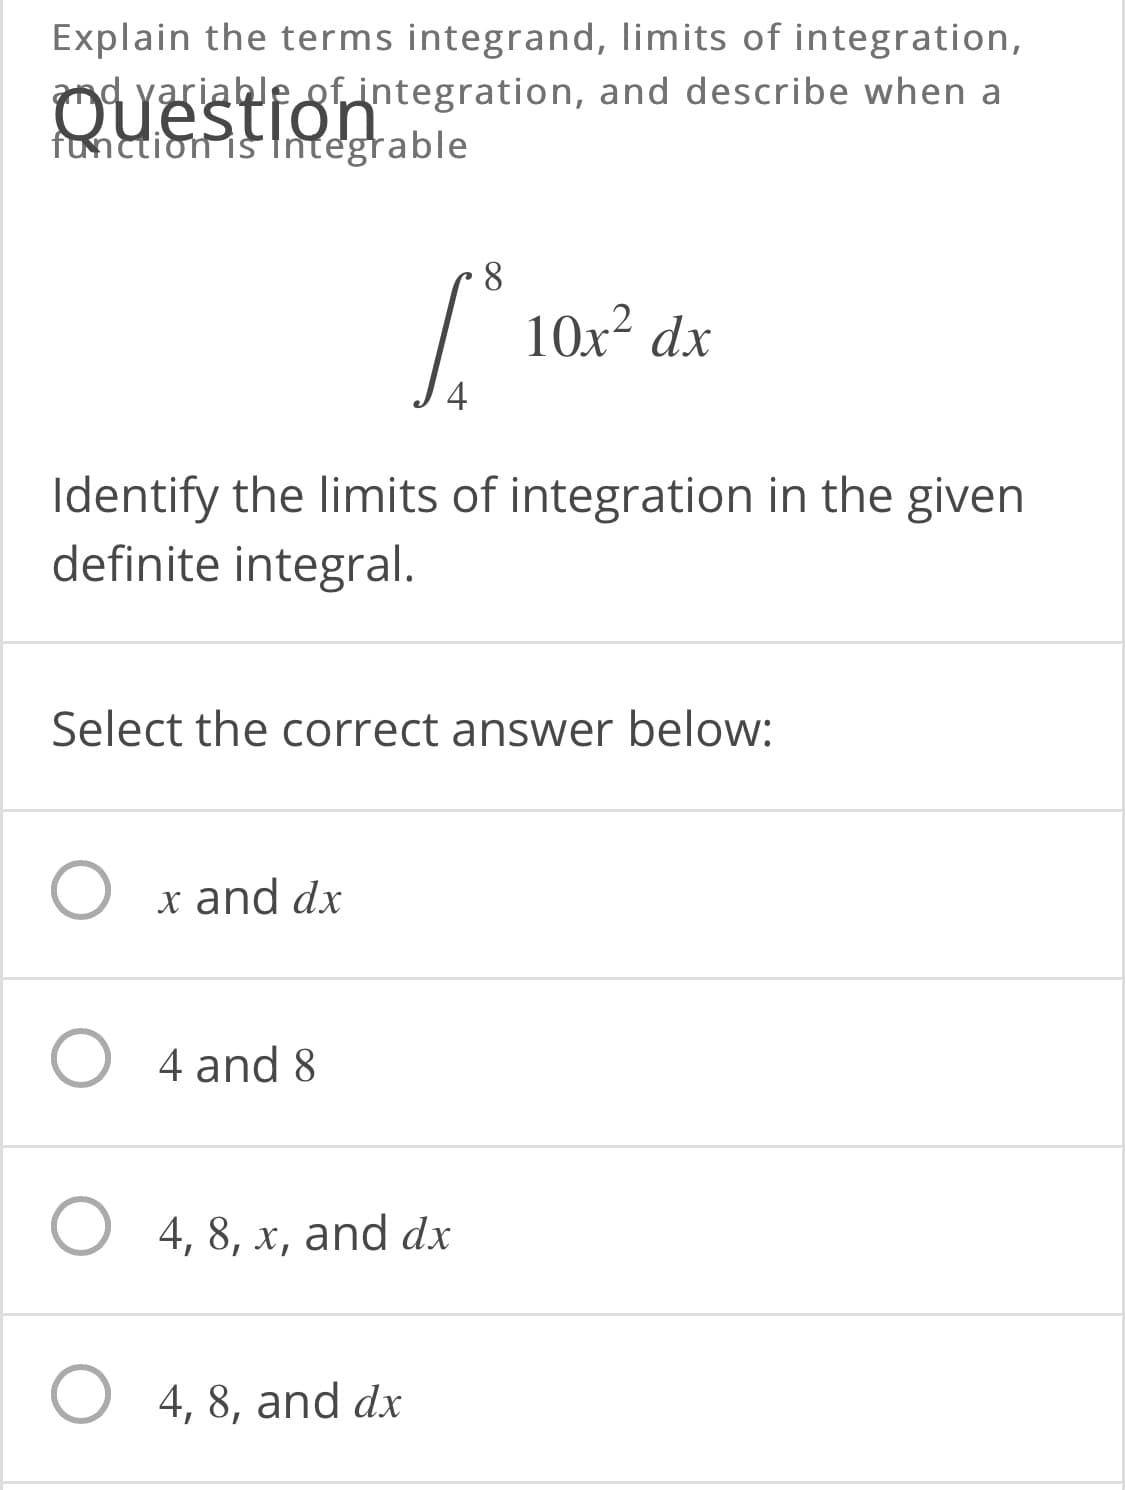 Explain the terms integrand, limits of integration,
yariable of integration, and describe when a
function is Integrable
Ouestion
8.
10x² dx
Identify the limits of integration in the given
definite integral.
Select the correct answer below:
x and dx
4 and 8
4, 8, x, and dx
O 4, 8, and dx
